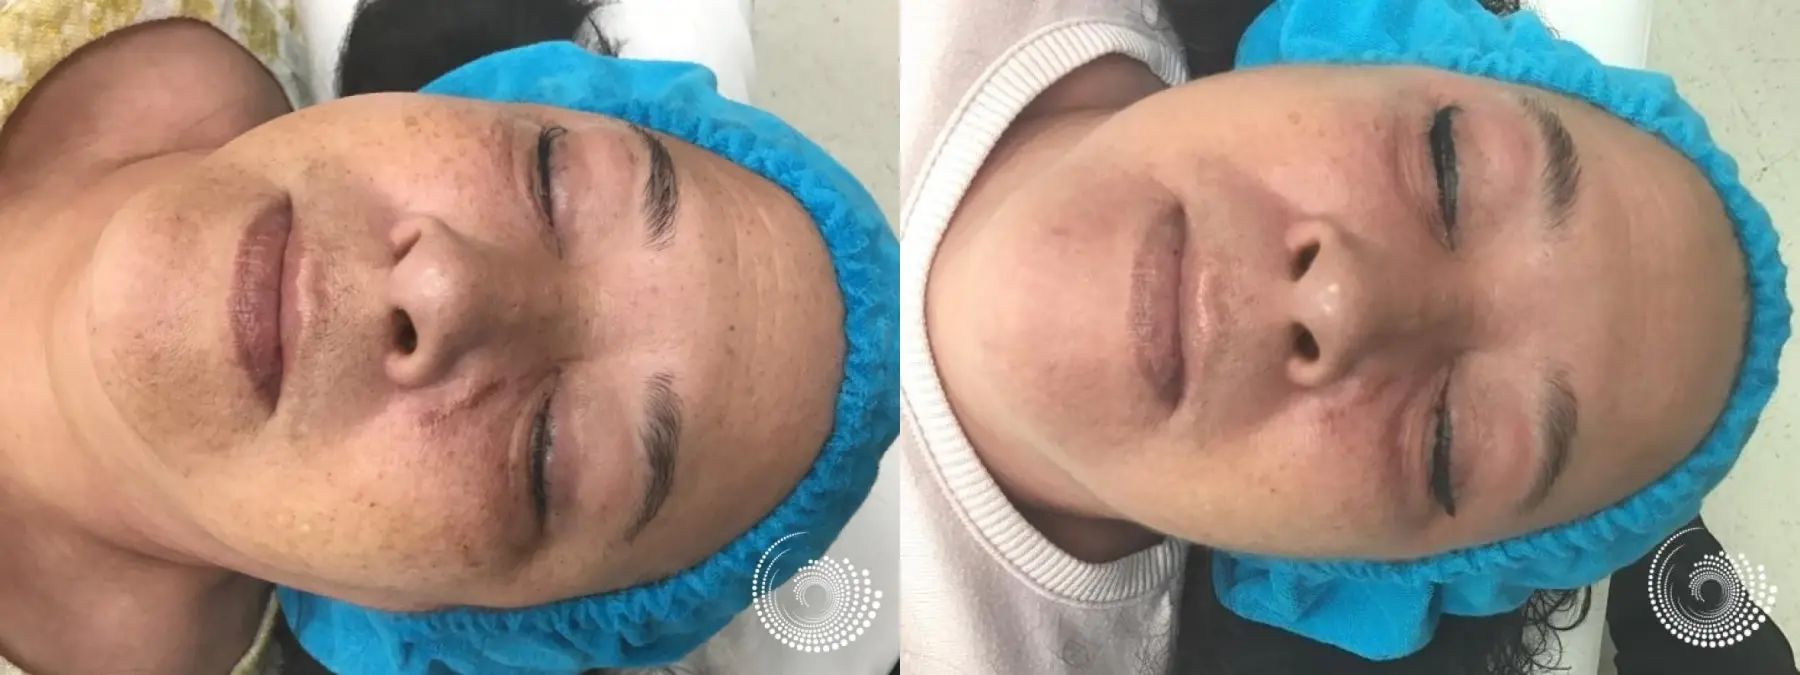 Mini Melanage Peel to reduce hyperpigmentation - Before and After 2